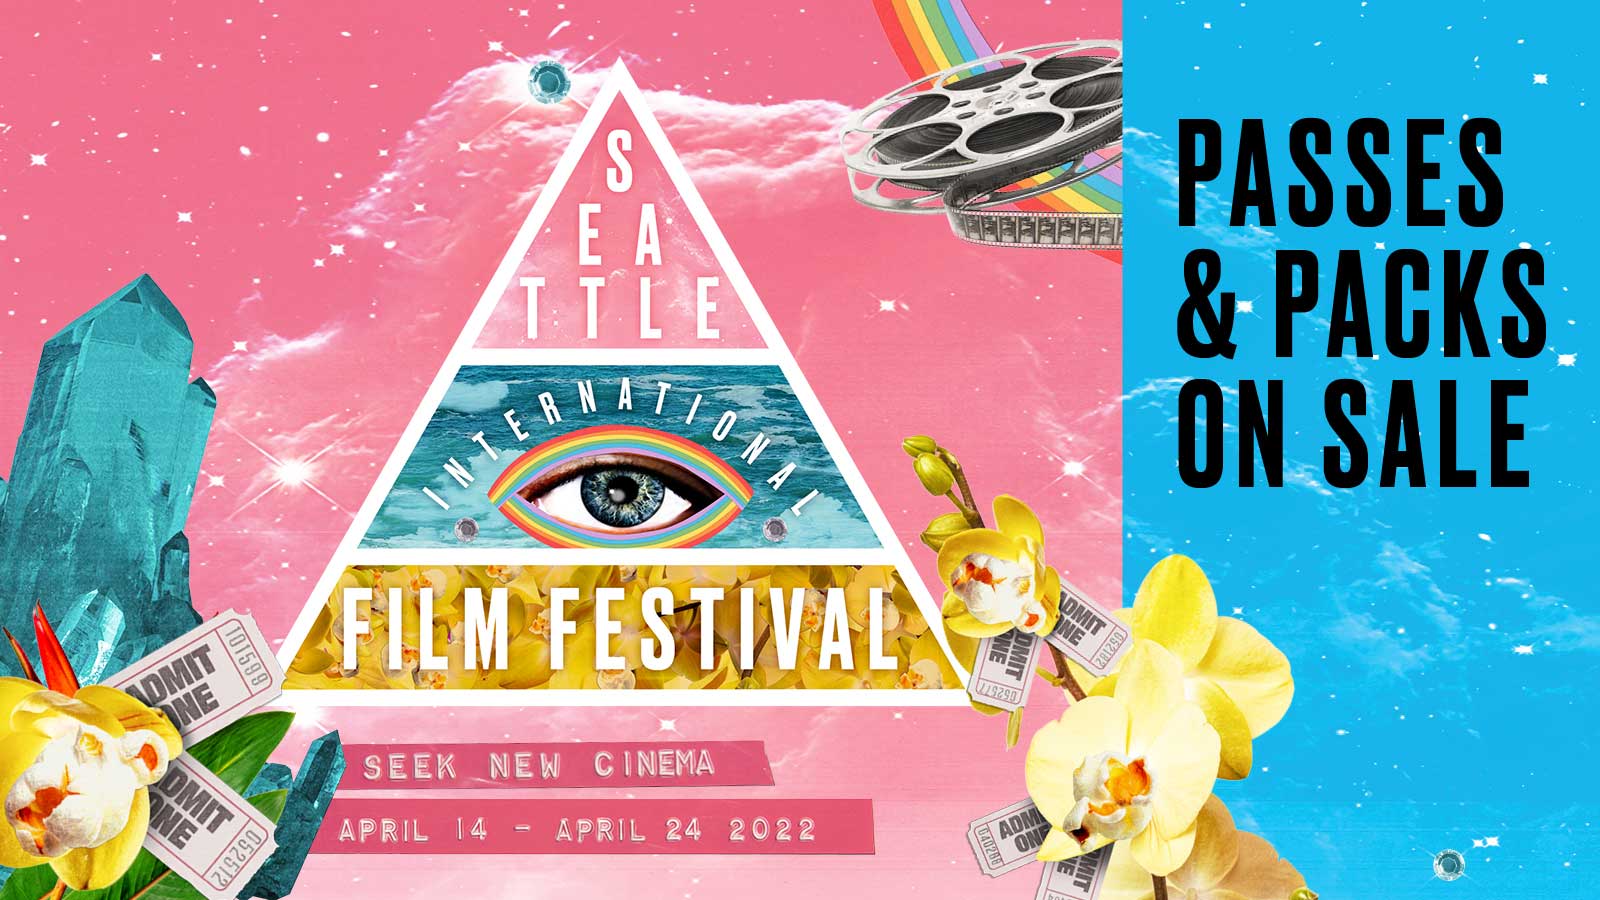  Seattle International Film Festival takes place April 14-24, 2022. Passes and packs on sale now.